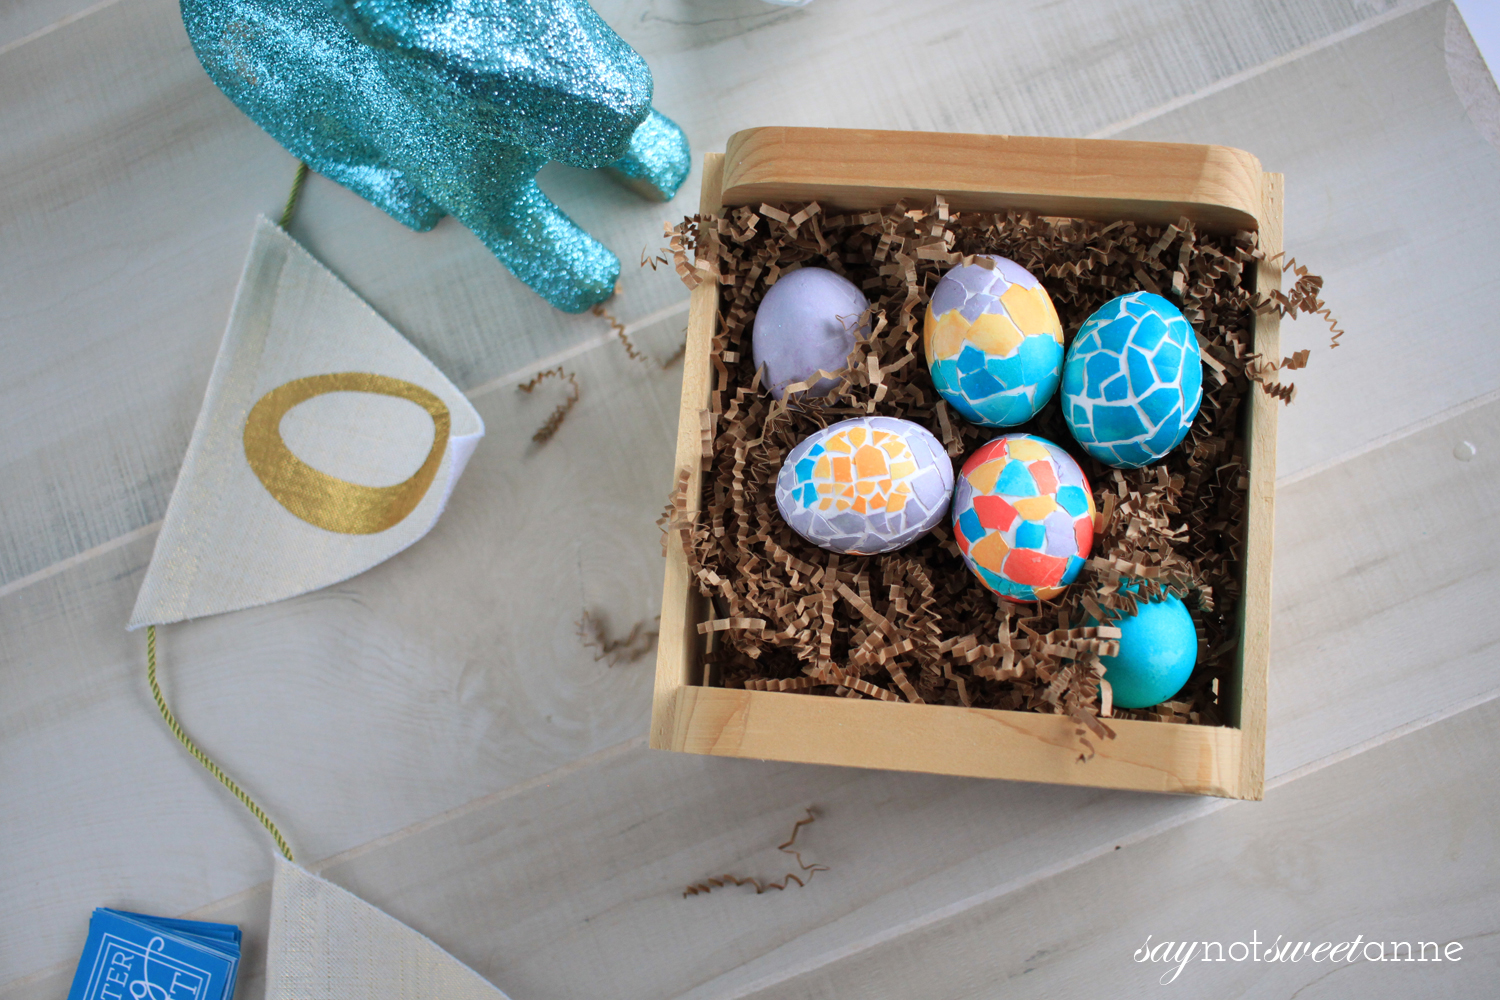 Mosaic Easter Egg Dye Ideas and Designs! This intricate looking effect is actually really easy! | saynotsweetanne.com